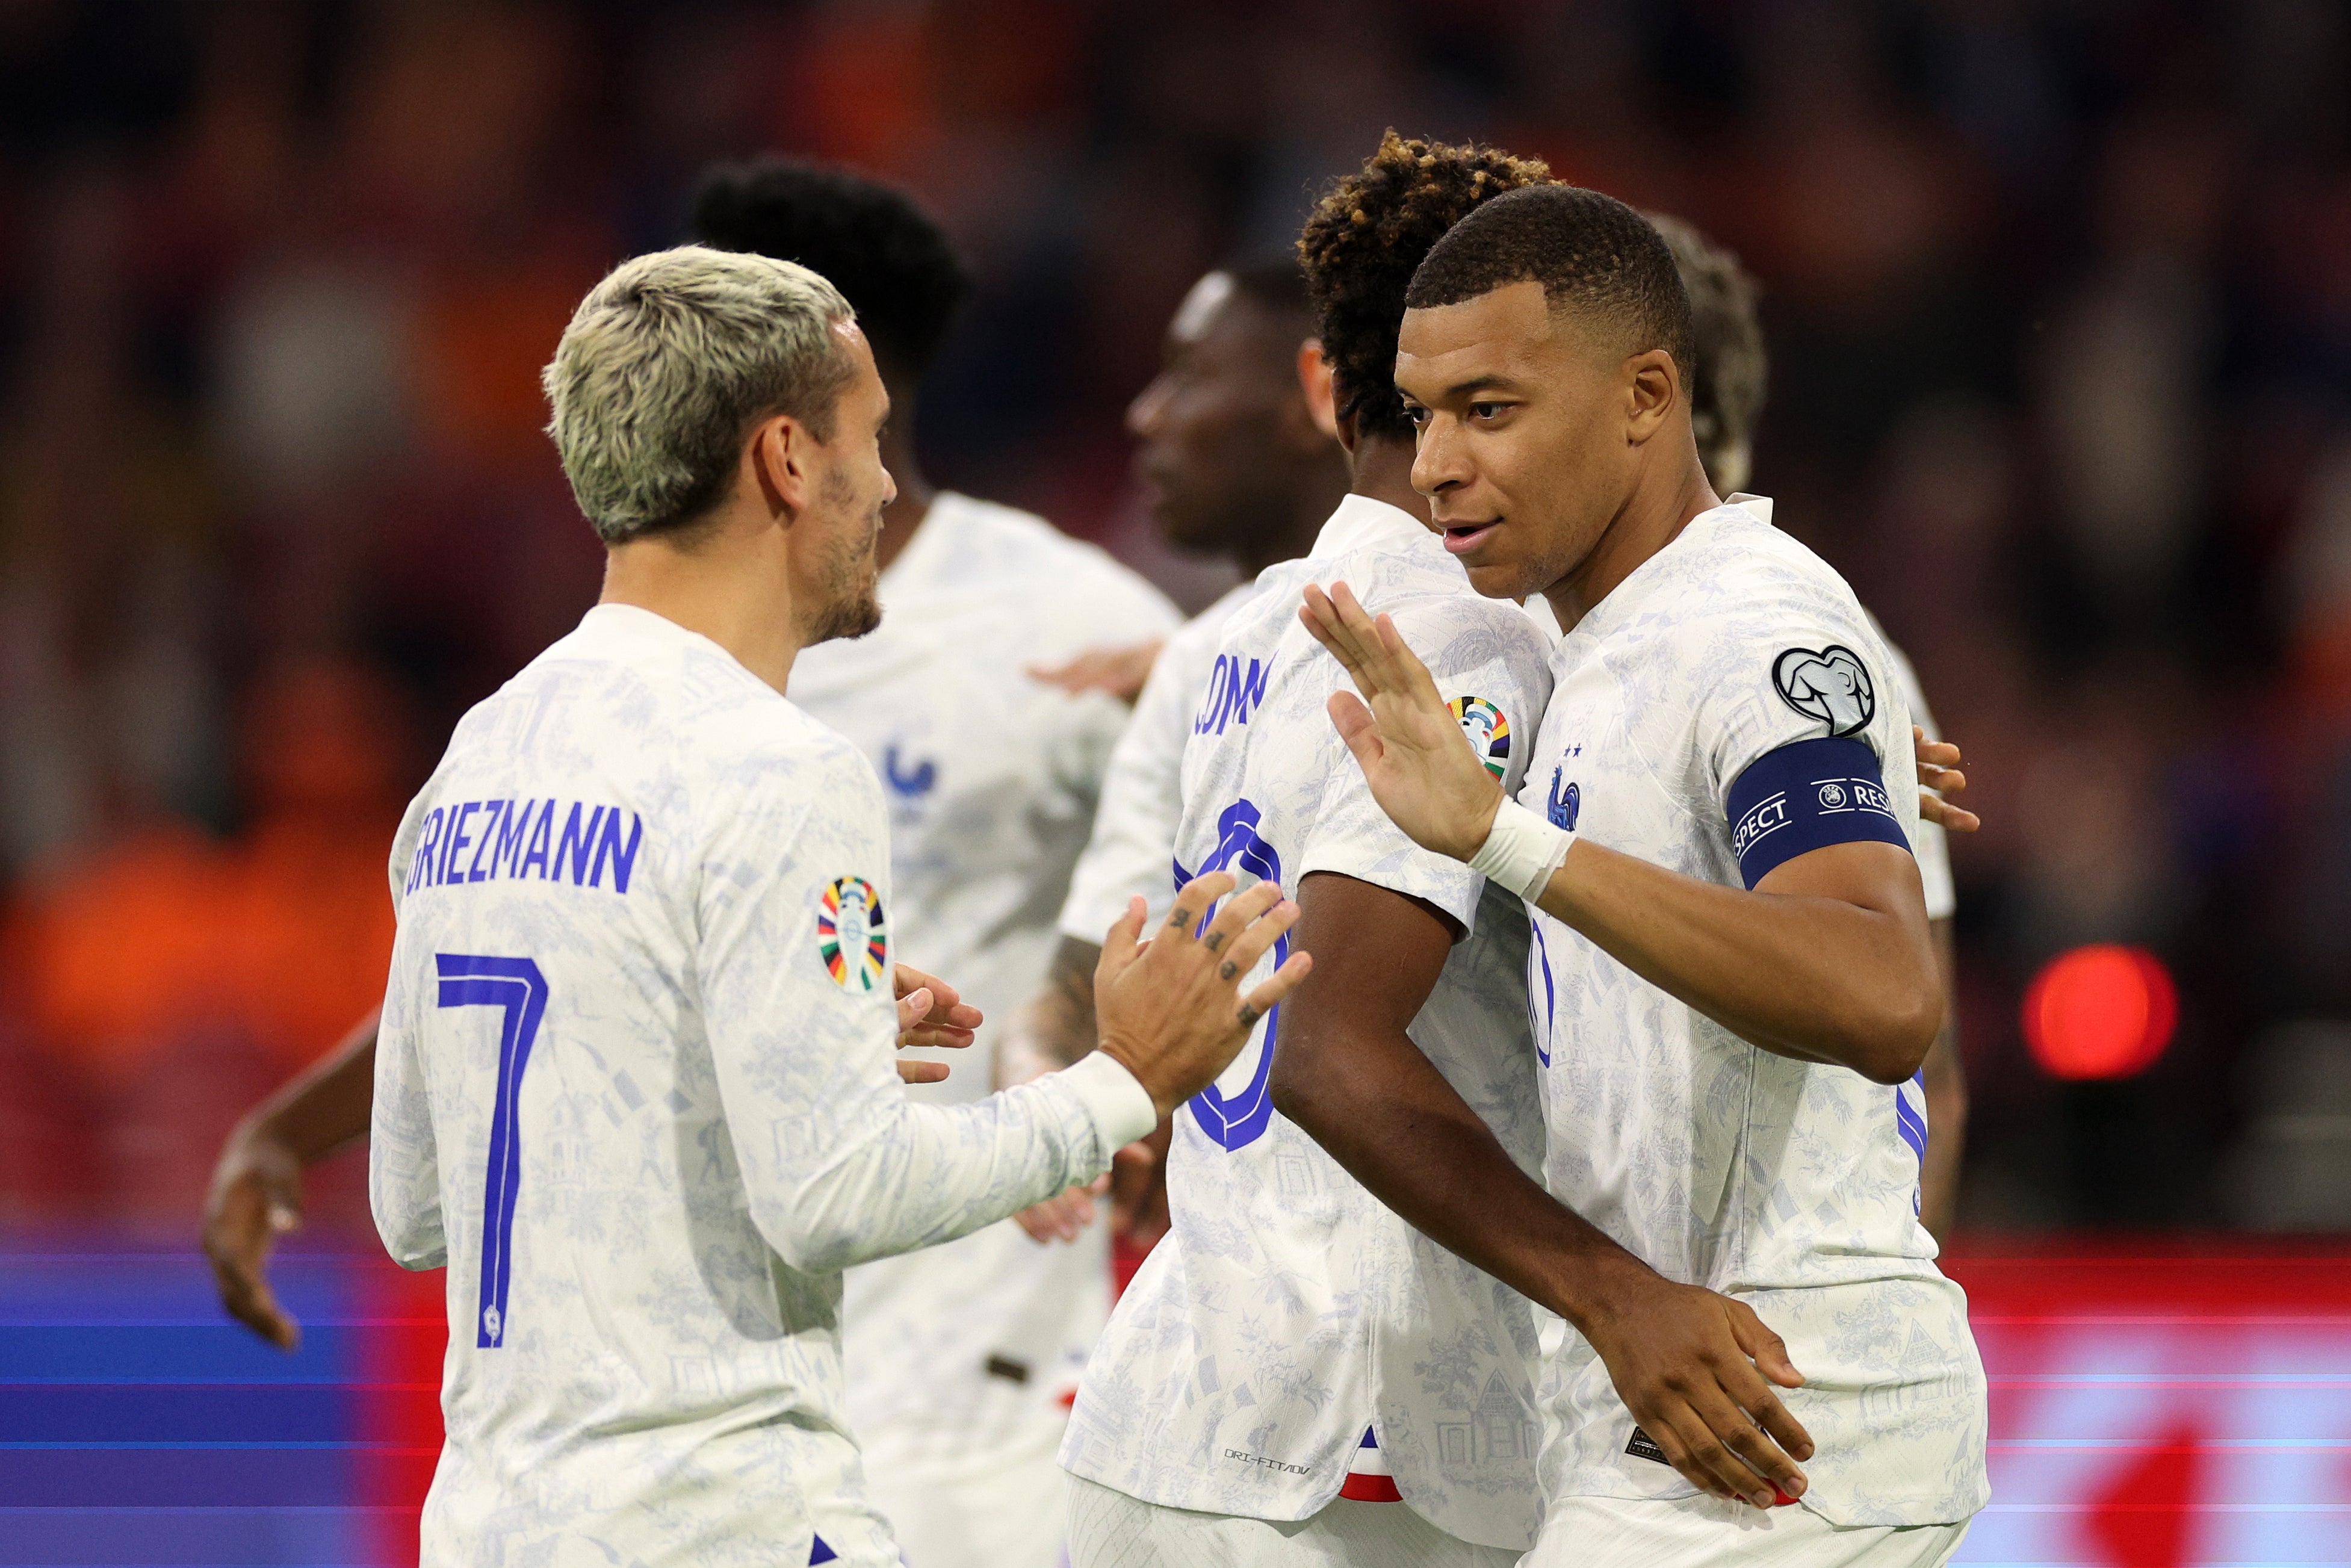 Antoine Griezmann and Kylian Mbappe starred at the last World Cup and France will be contenders again